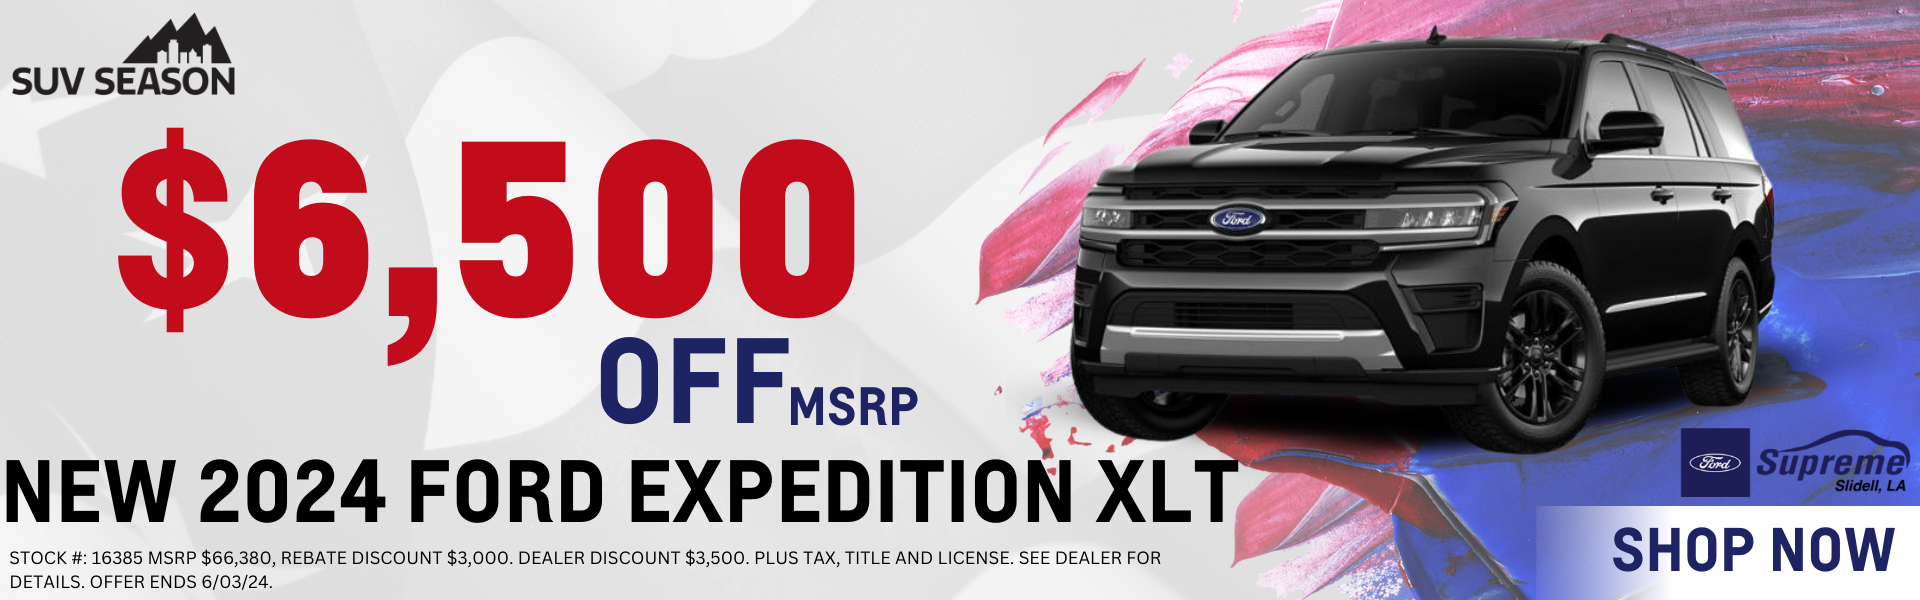 2024 Expedition XLT $6500 off MSRP